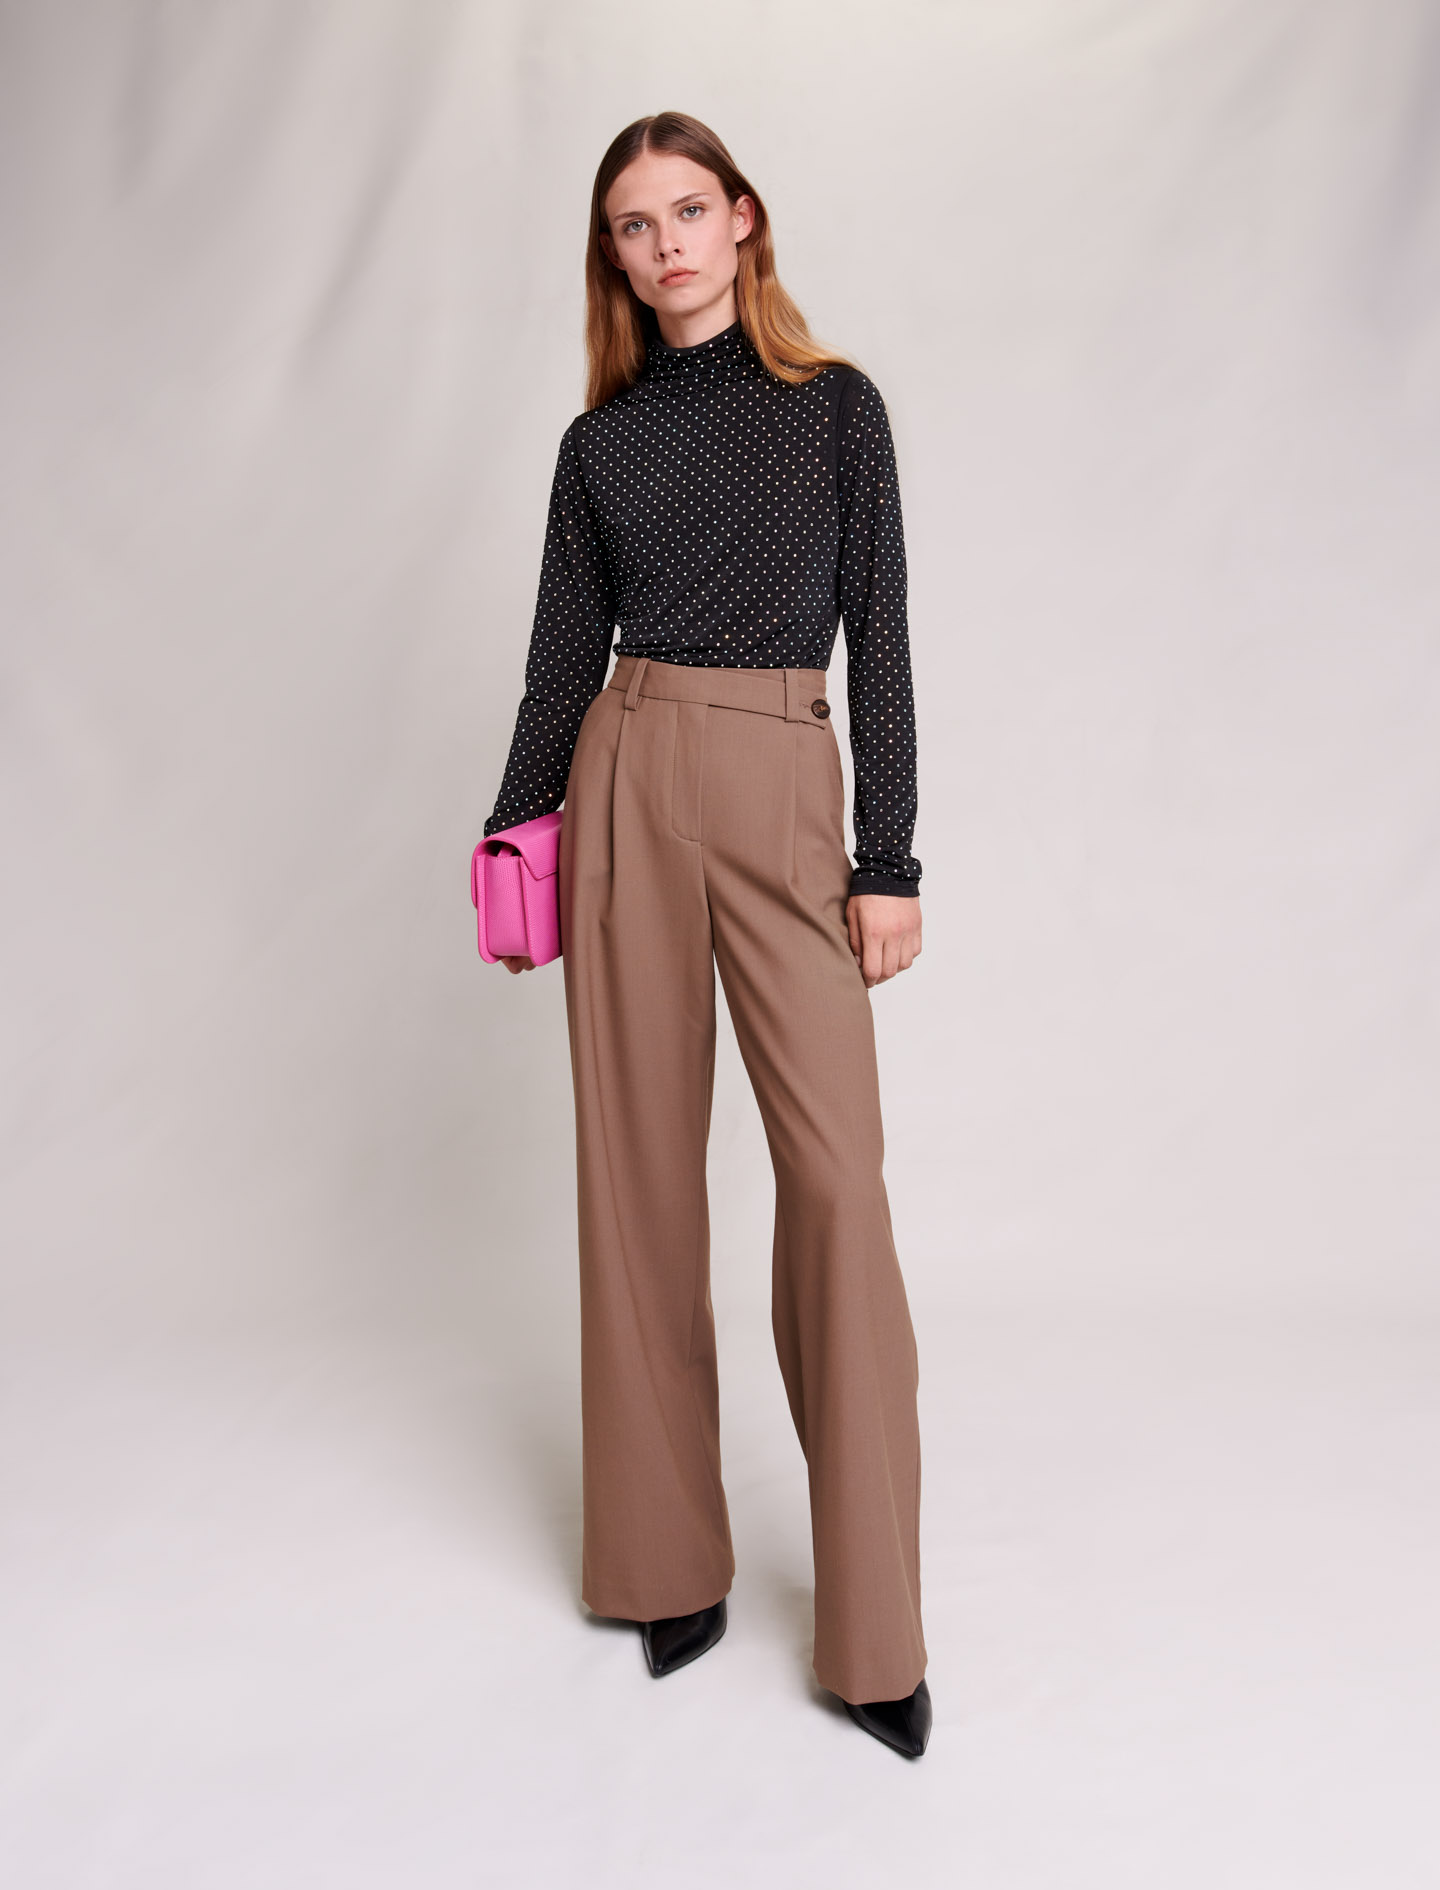 Maje Woman's polyester, Wide-leg trousers for Fall/Winter, in color Camel / Brown